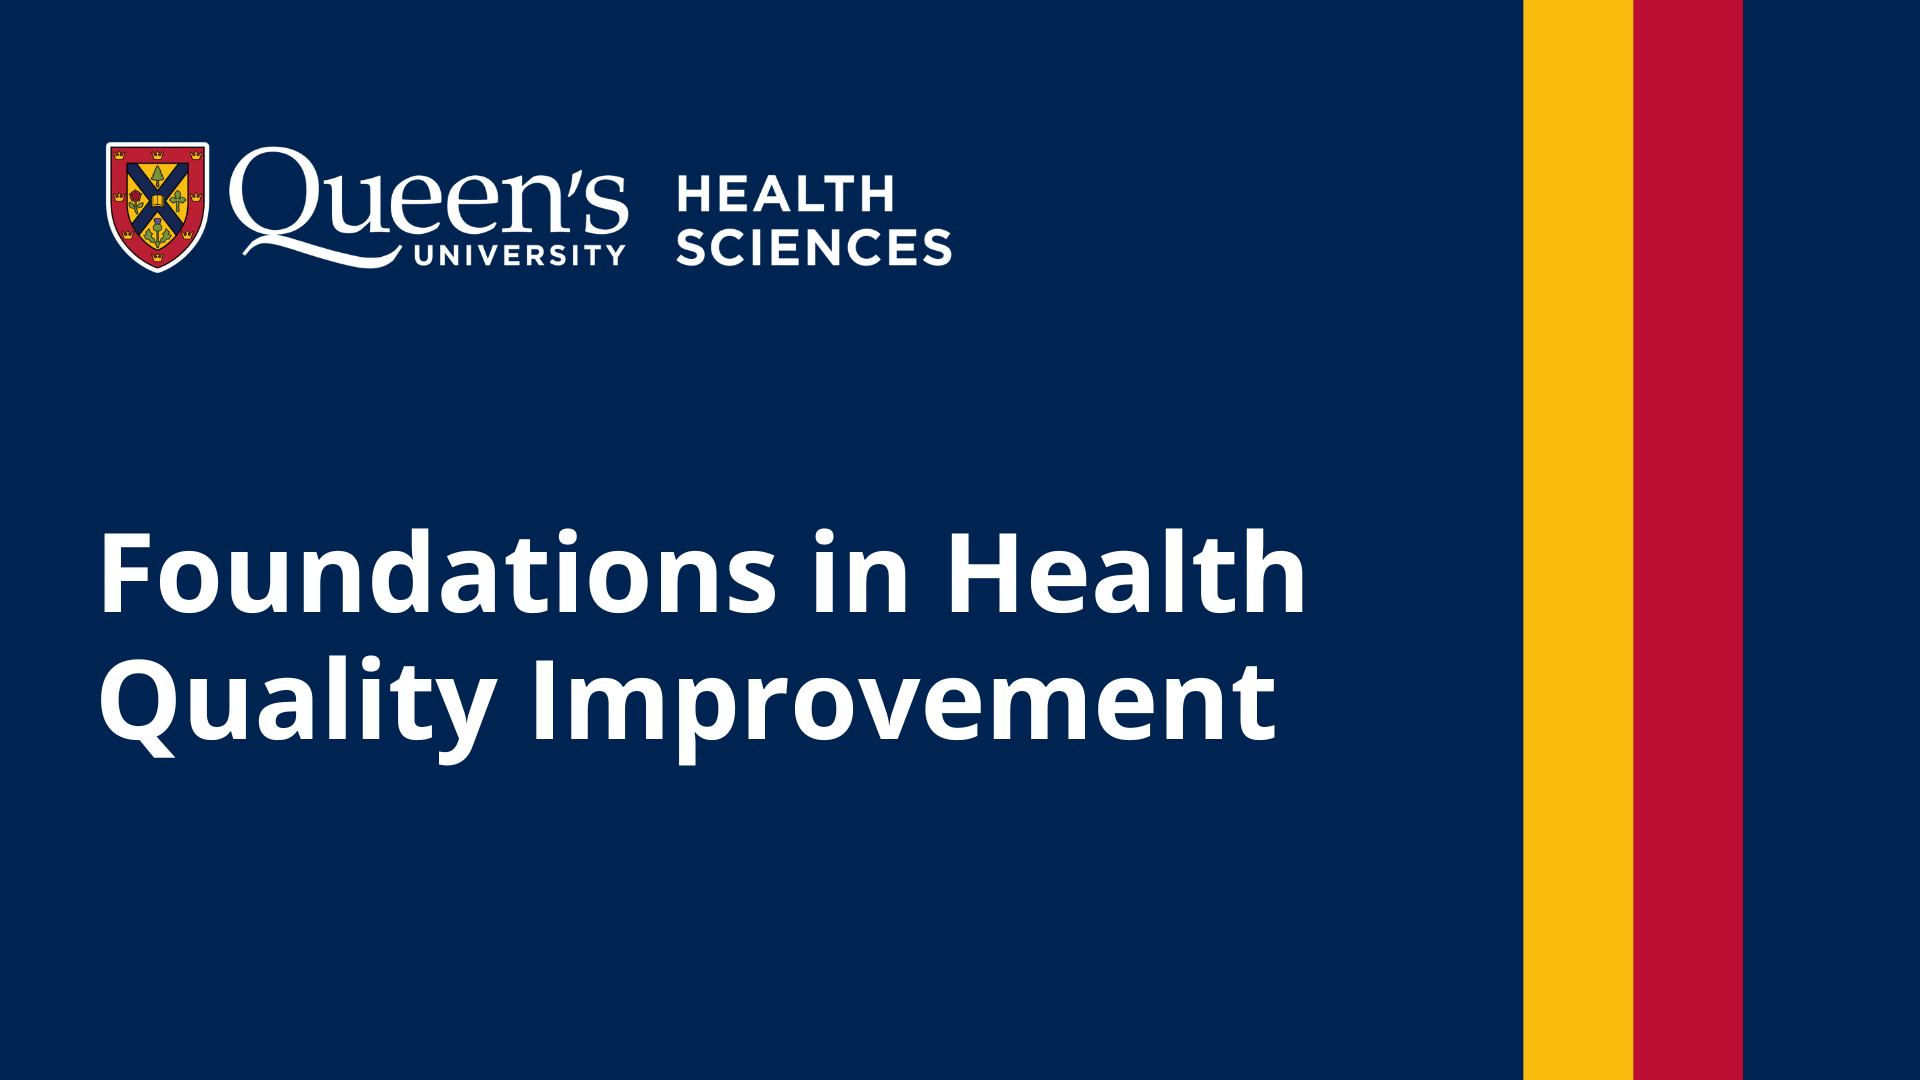 View a sneak peek of Foundations in Health Quality Improvement